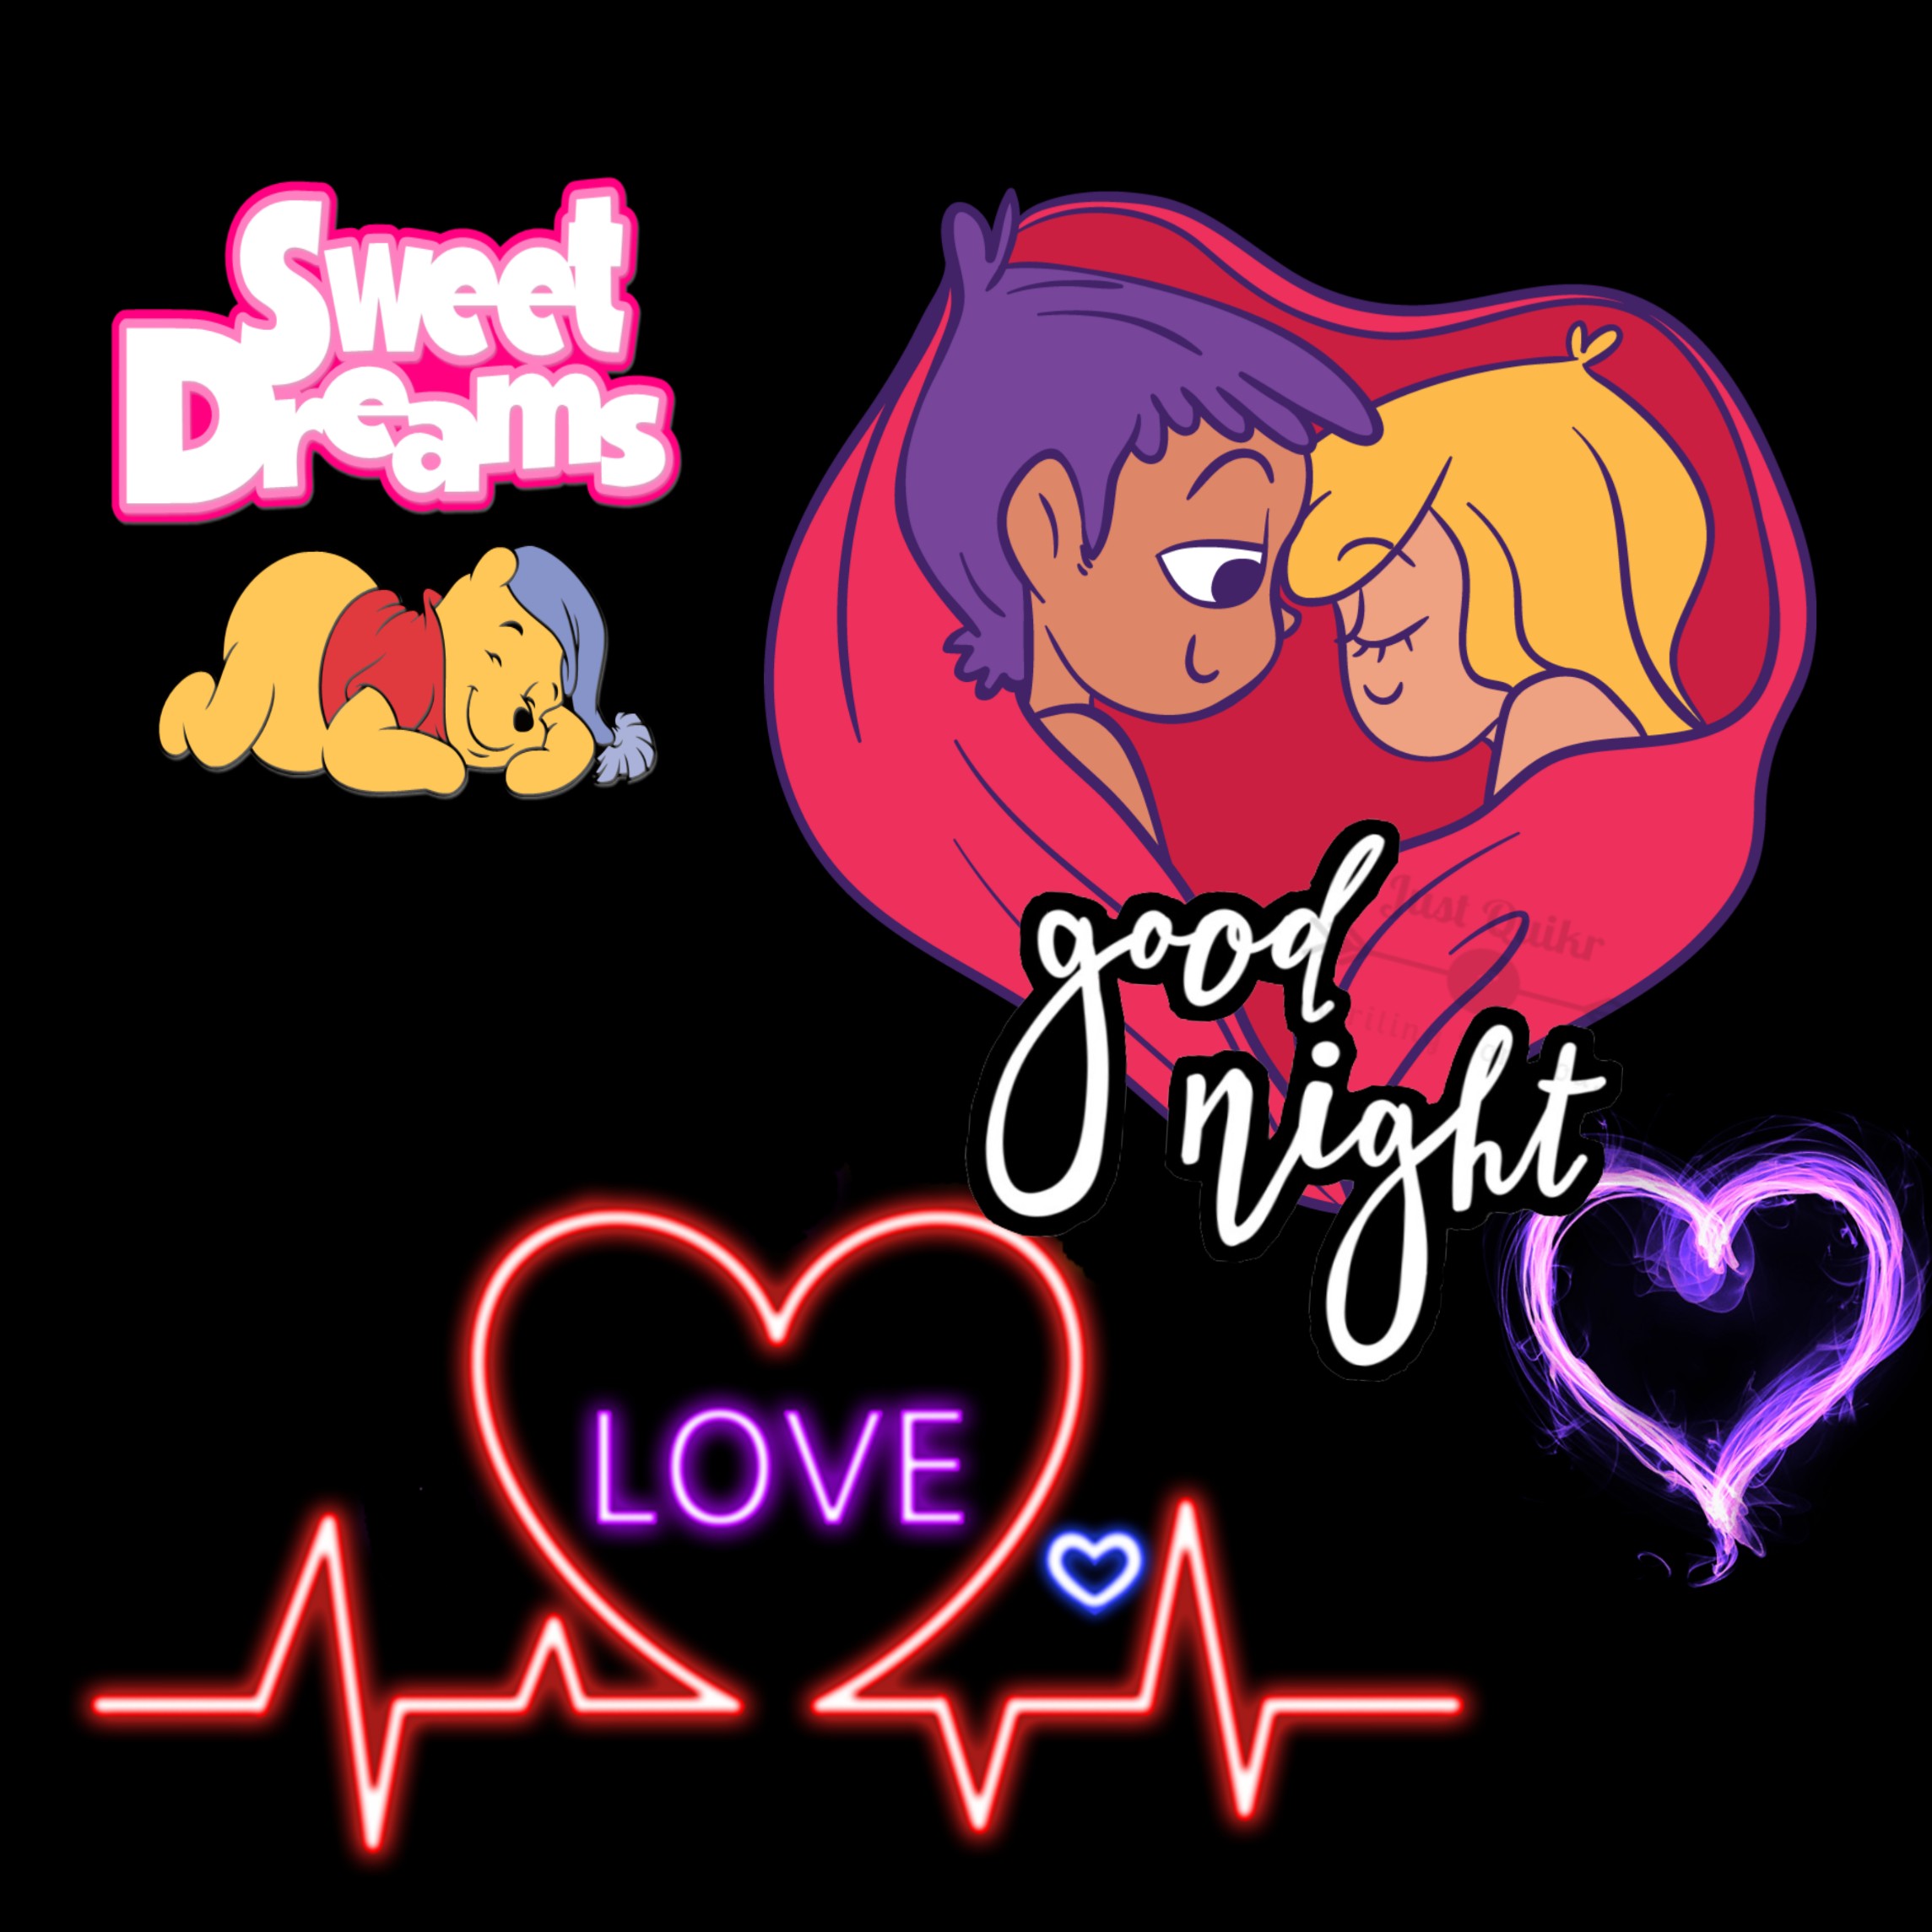 Good Night HD Pics Images For Him With Love